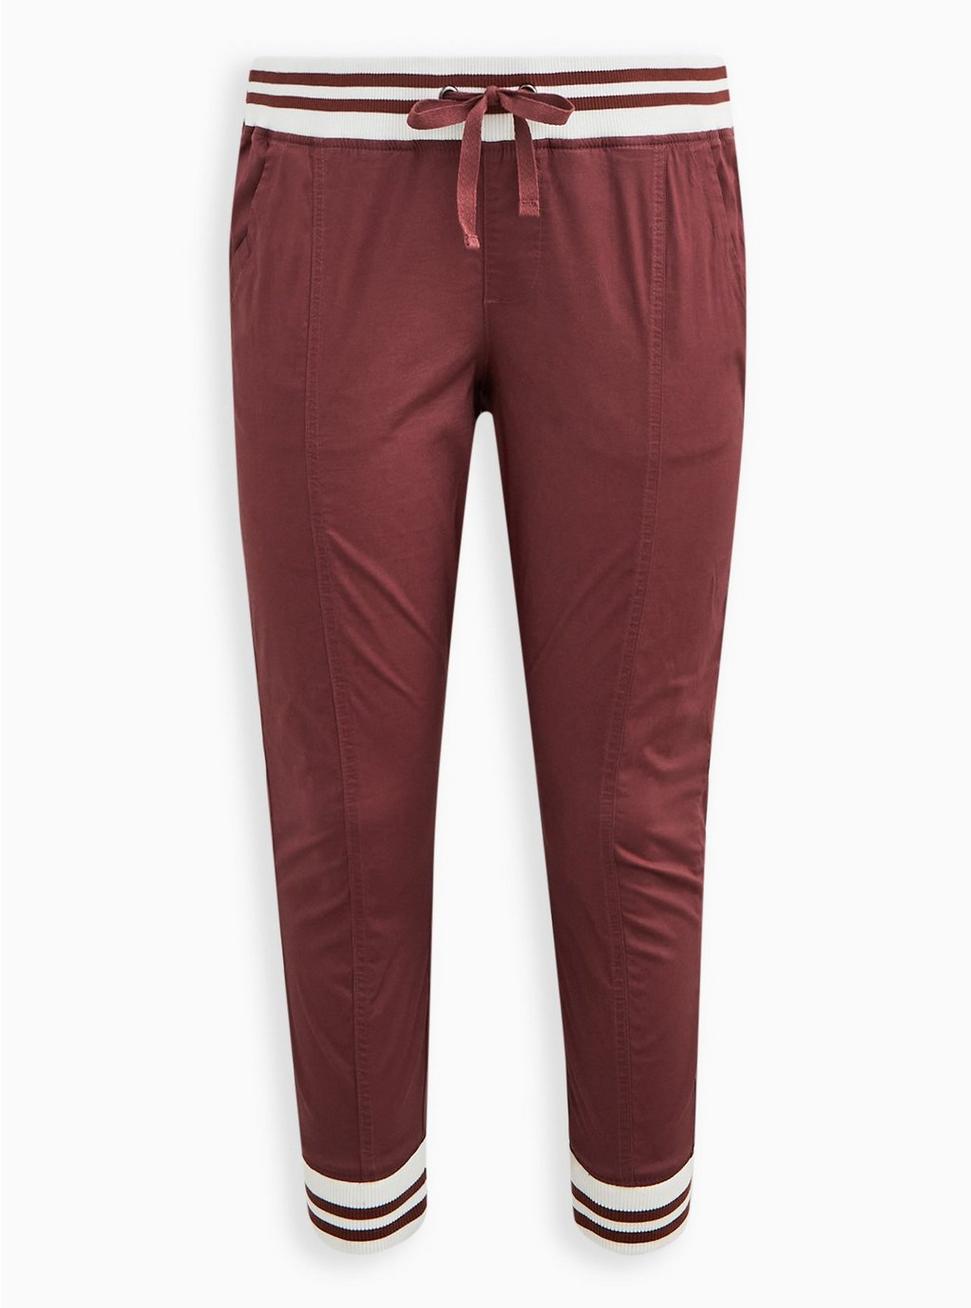 Classic Fit Jogger Stretch Poplin Mid-Rise Pant, WILD GINGER BURGUNDY, hi-res